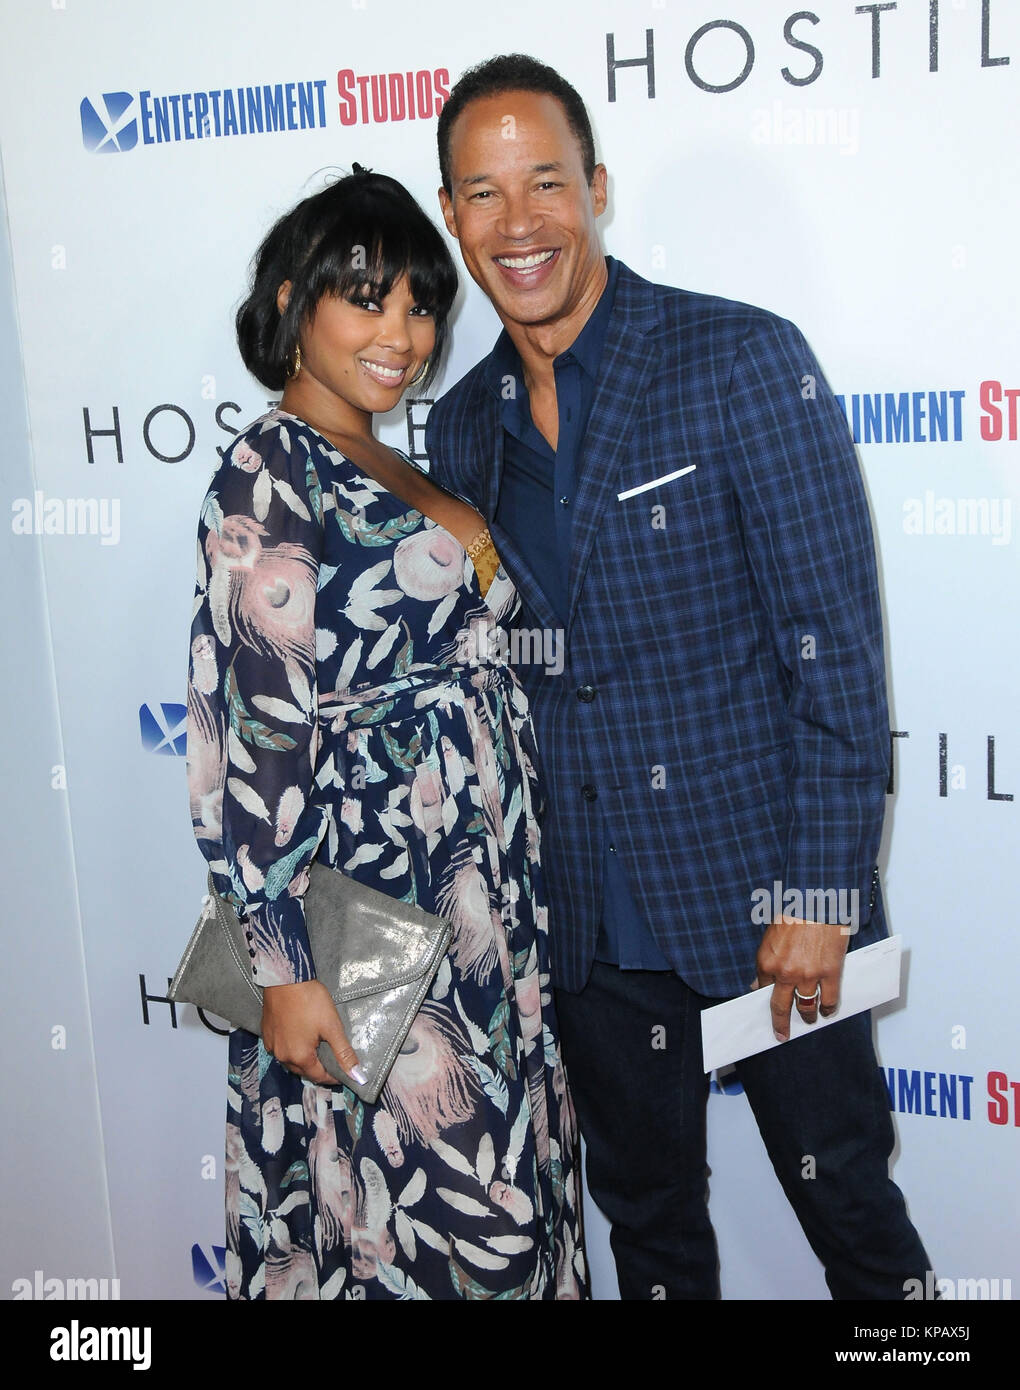 Beverly Hills, California, USA. 14th December, 2017. (L-R) Actress Milan Kelley and producer Jon Kelley attend the Los Angeles premiere of Entertainment Studios Motion Pictures' 'Hostiles' at Samuel Goldwyn Theater on December 14, 2017 in Beverly Hills, California. Photo by Barry King/Alamy Live News Stock Photo